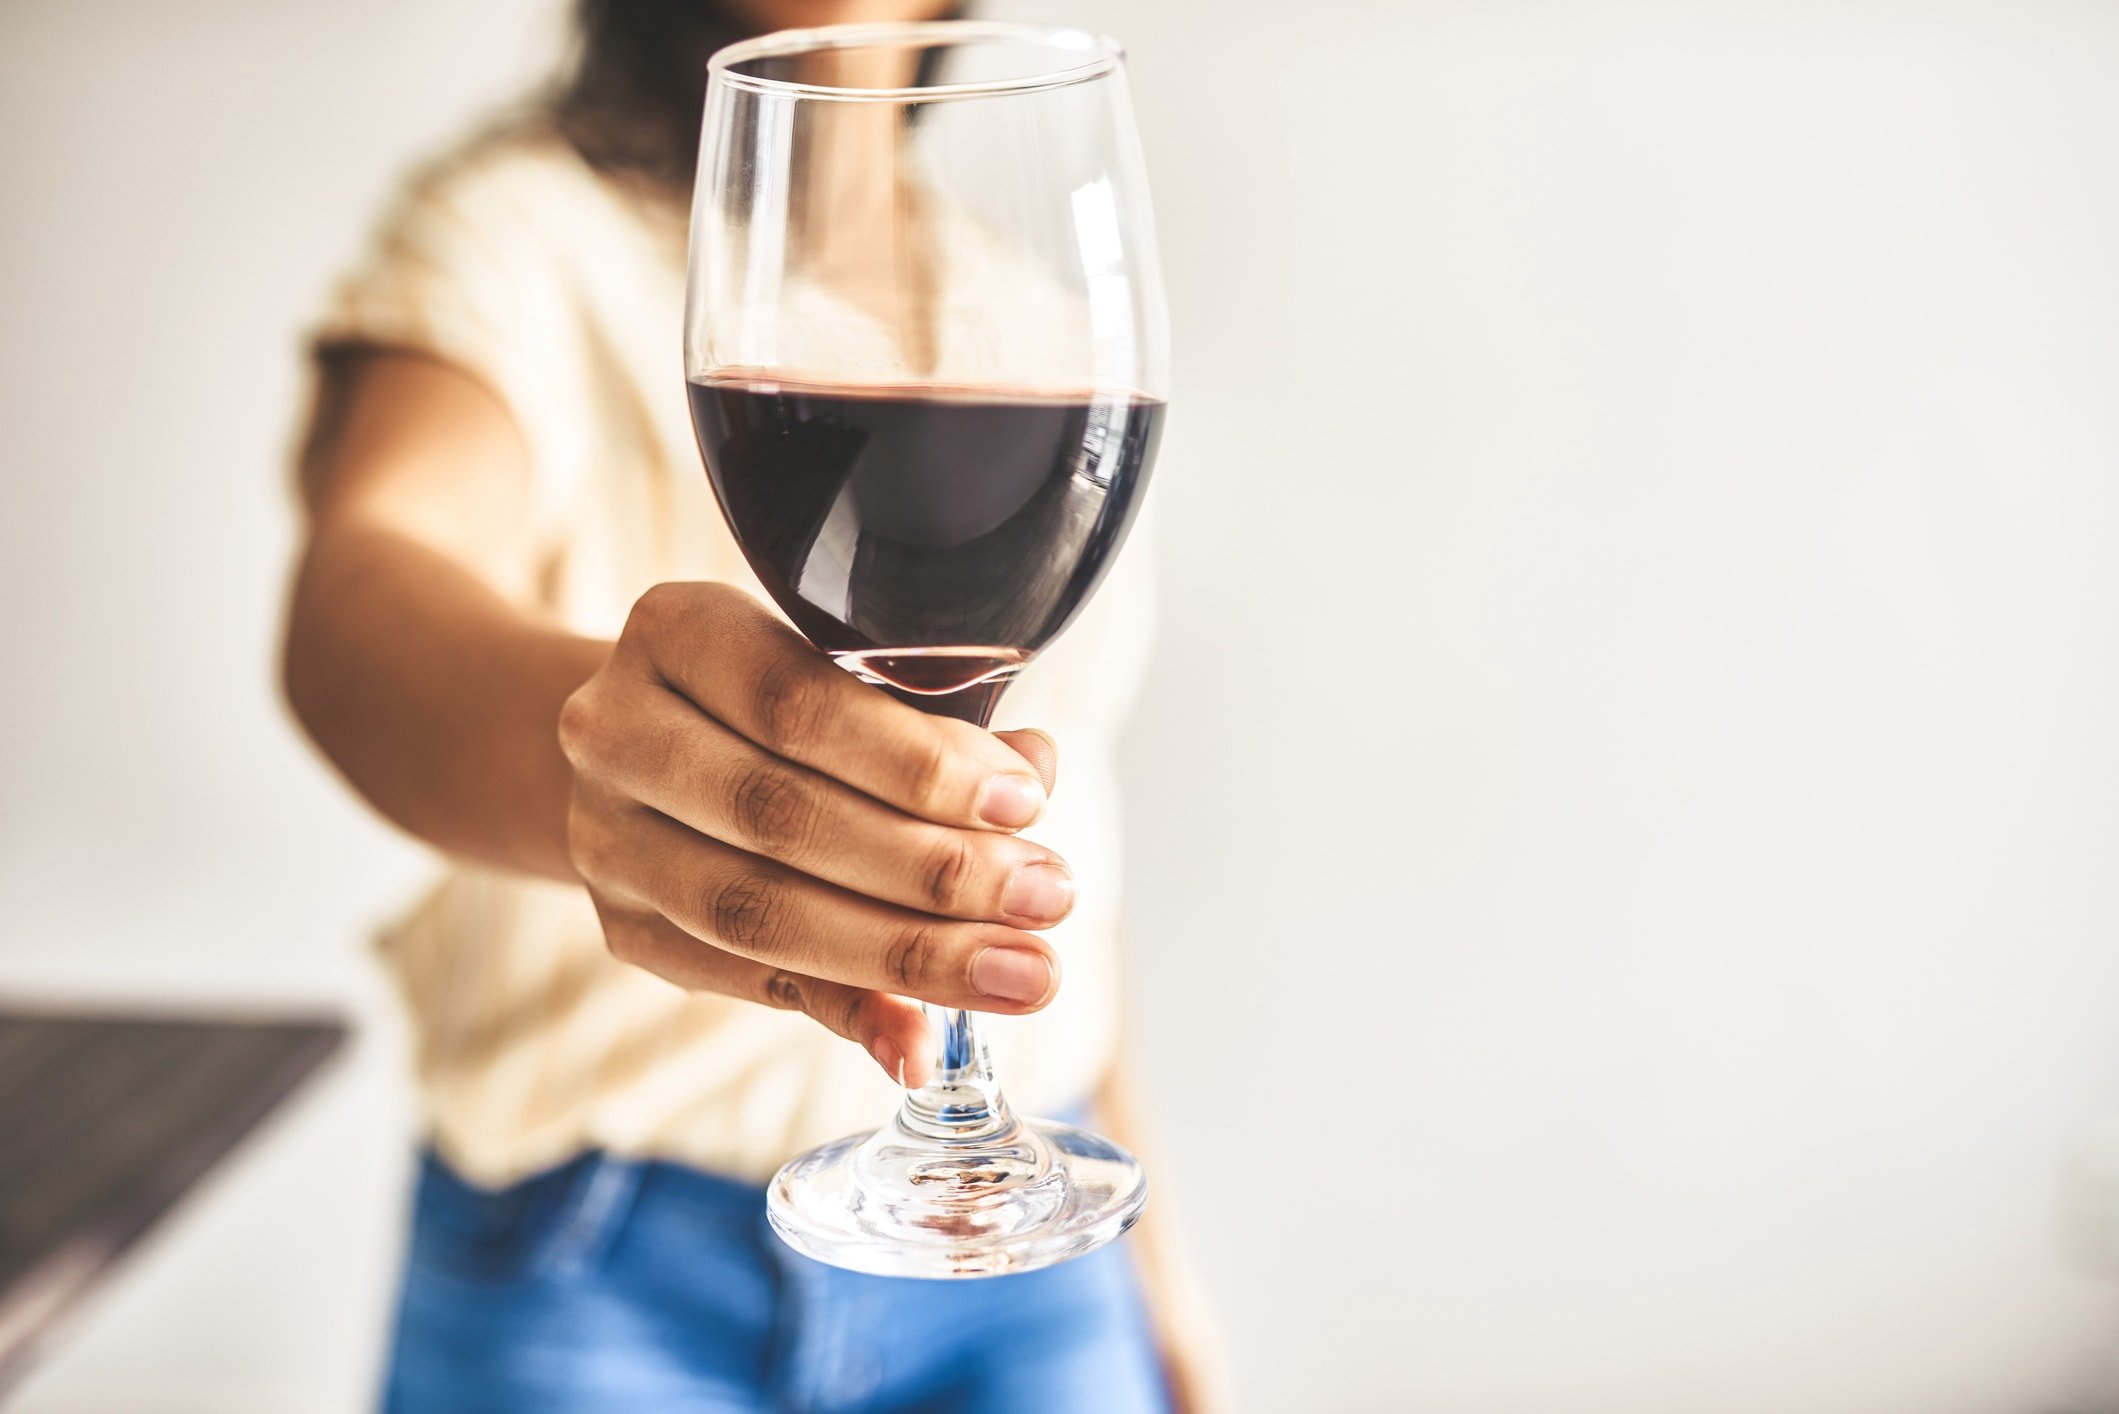 Cropped shot of an unrecognizable woman holding a glass of wine